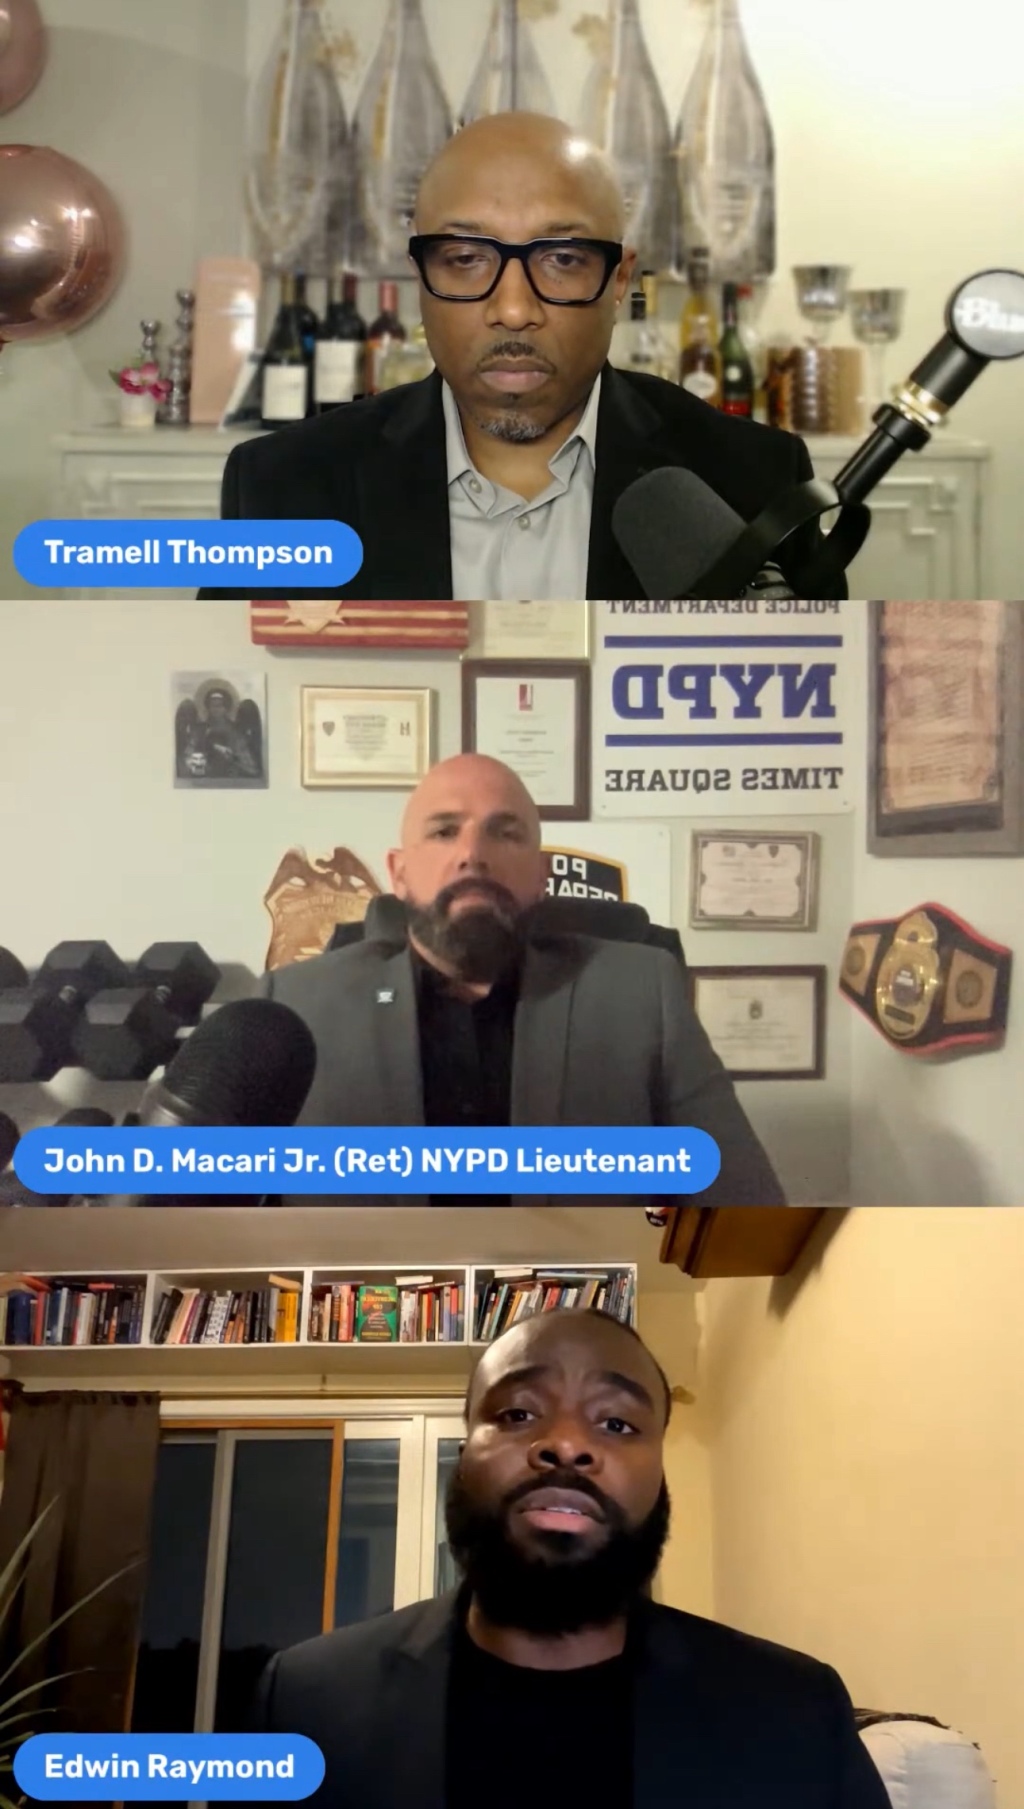 Retired NYPD Lt. Edwin Raymond & John Macari discuss OPPOSSING viewpoints on policing in NYC